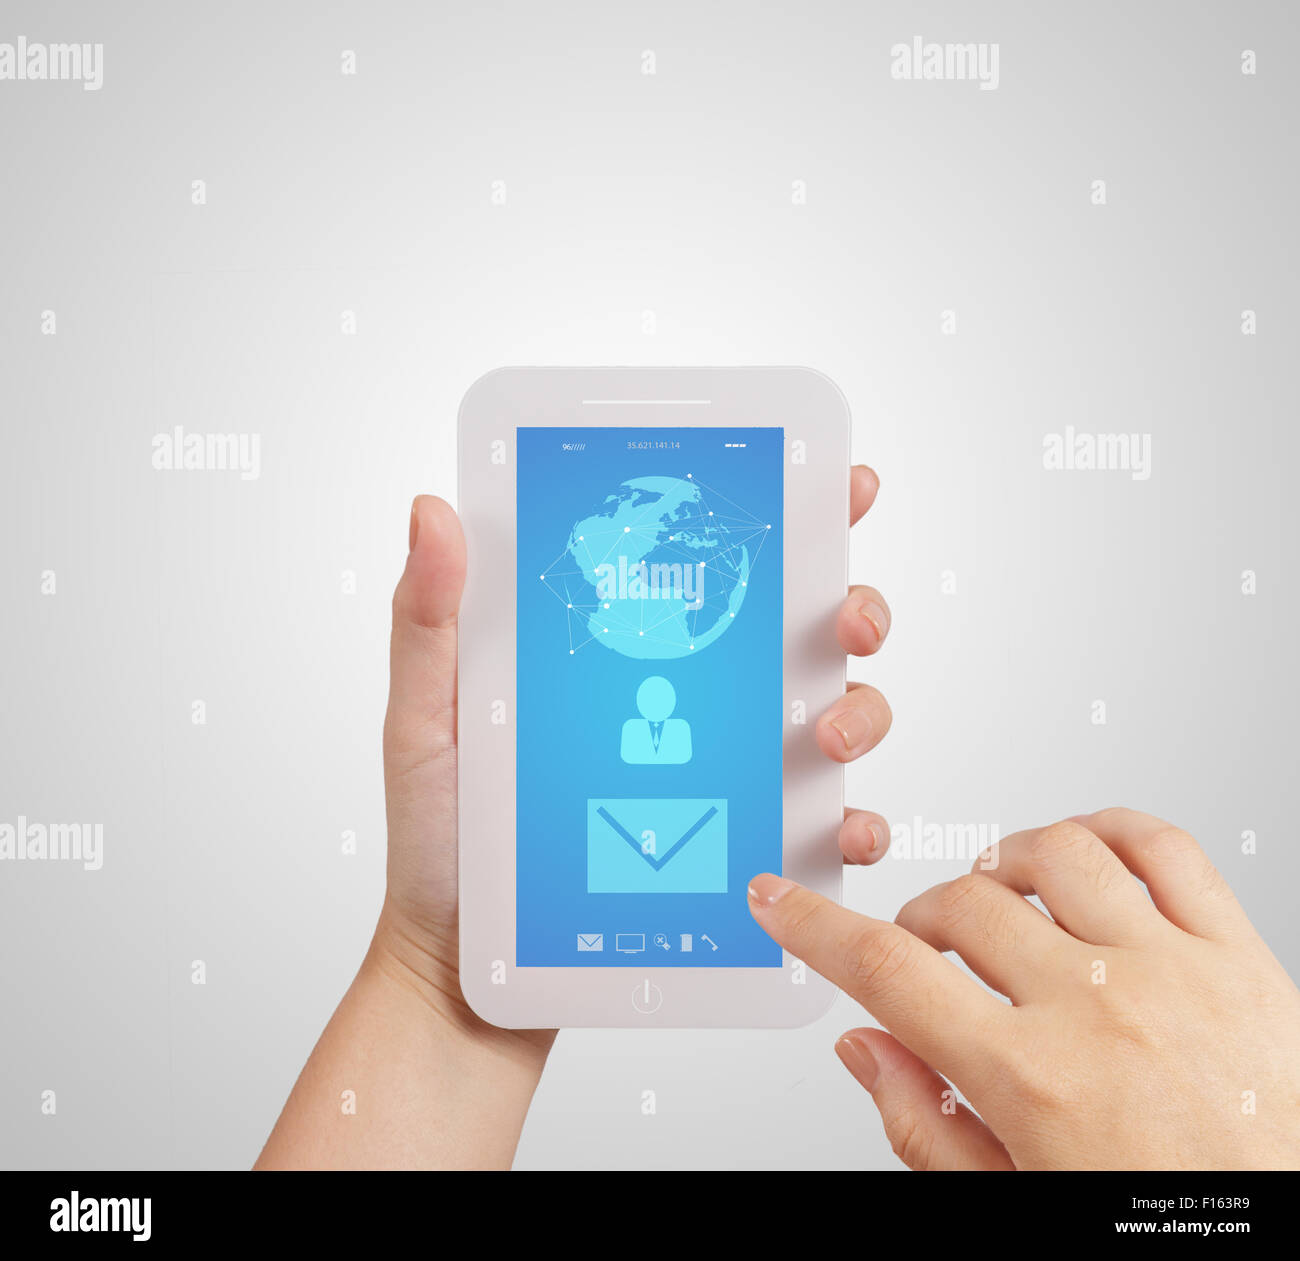 hand use Touch screen mobile phone with email icon as concept Stock Photo